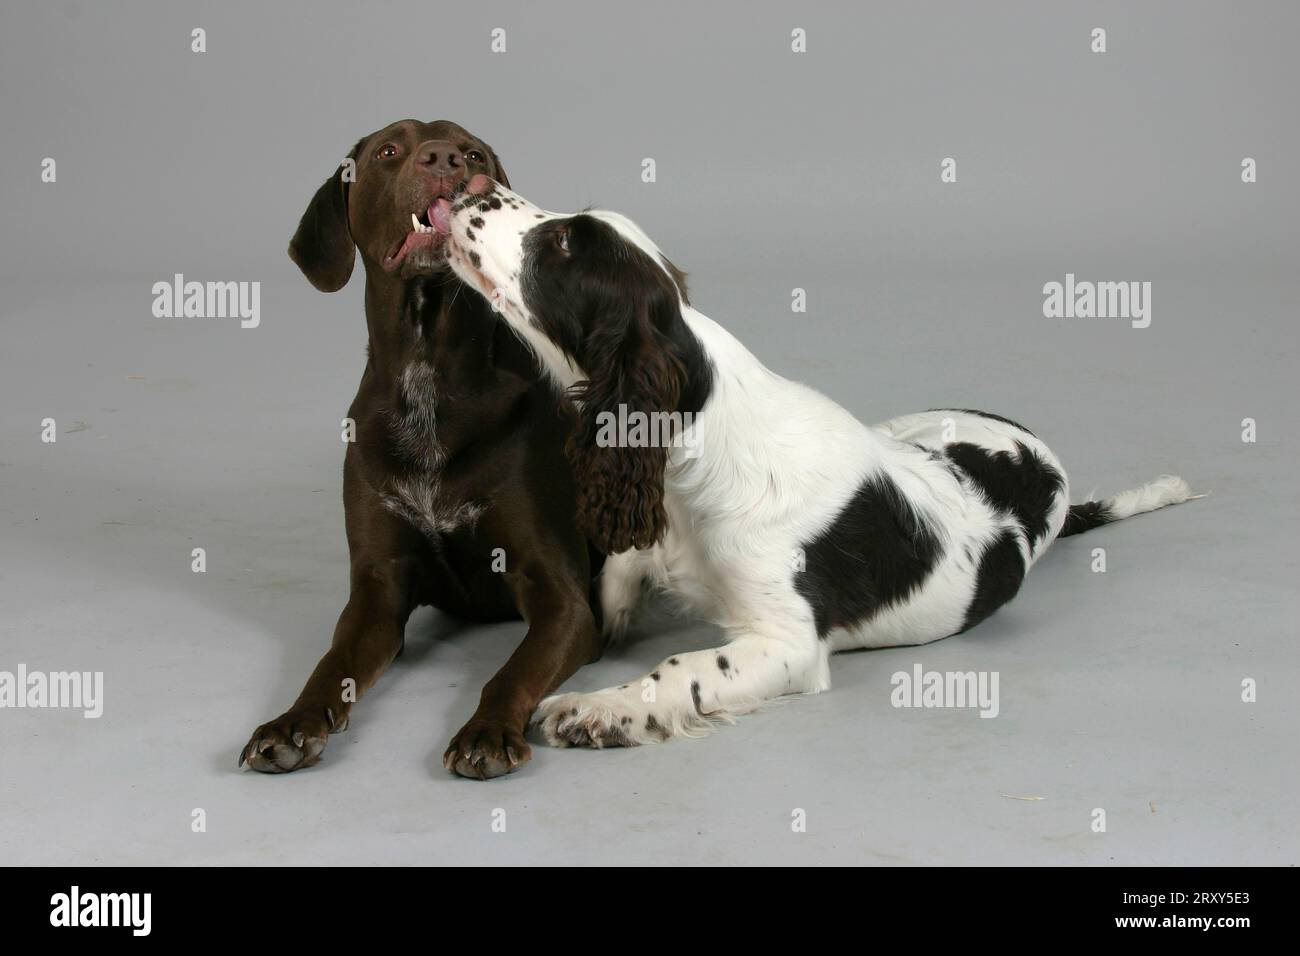 German Shorthaired Pointer and English Springer Spaniel puppy, puppy, German Shorthaired Pointer and English Springer Spaniel, indoor, studio Stock Photo